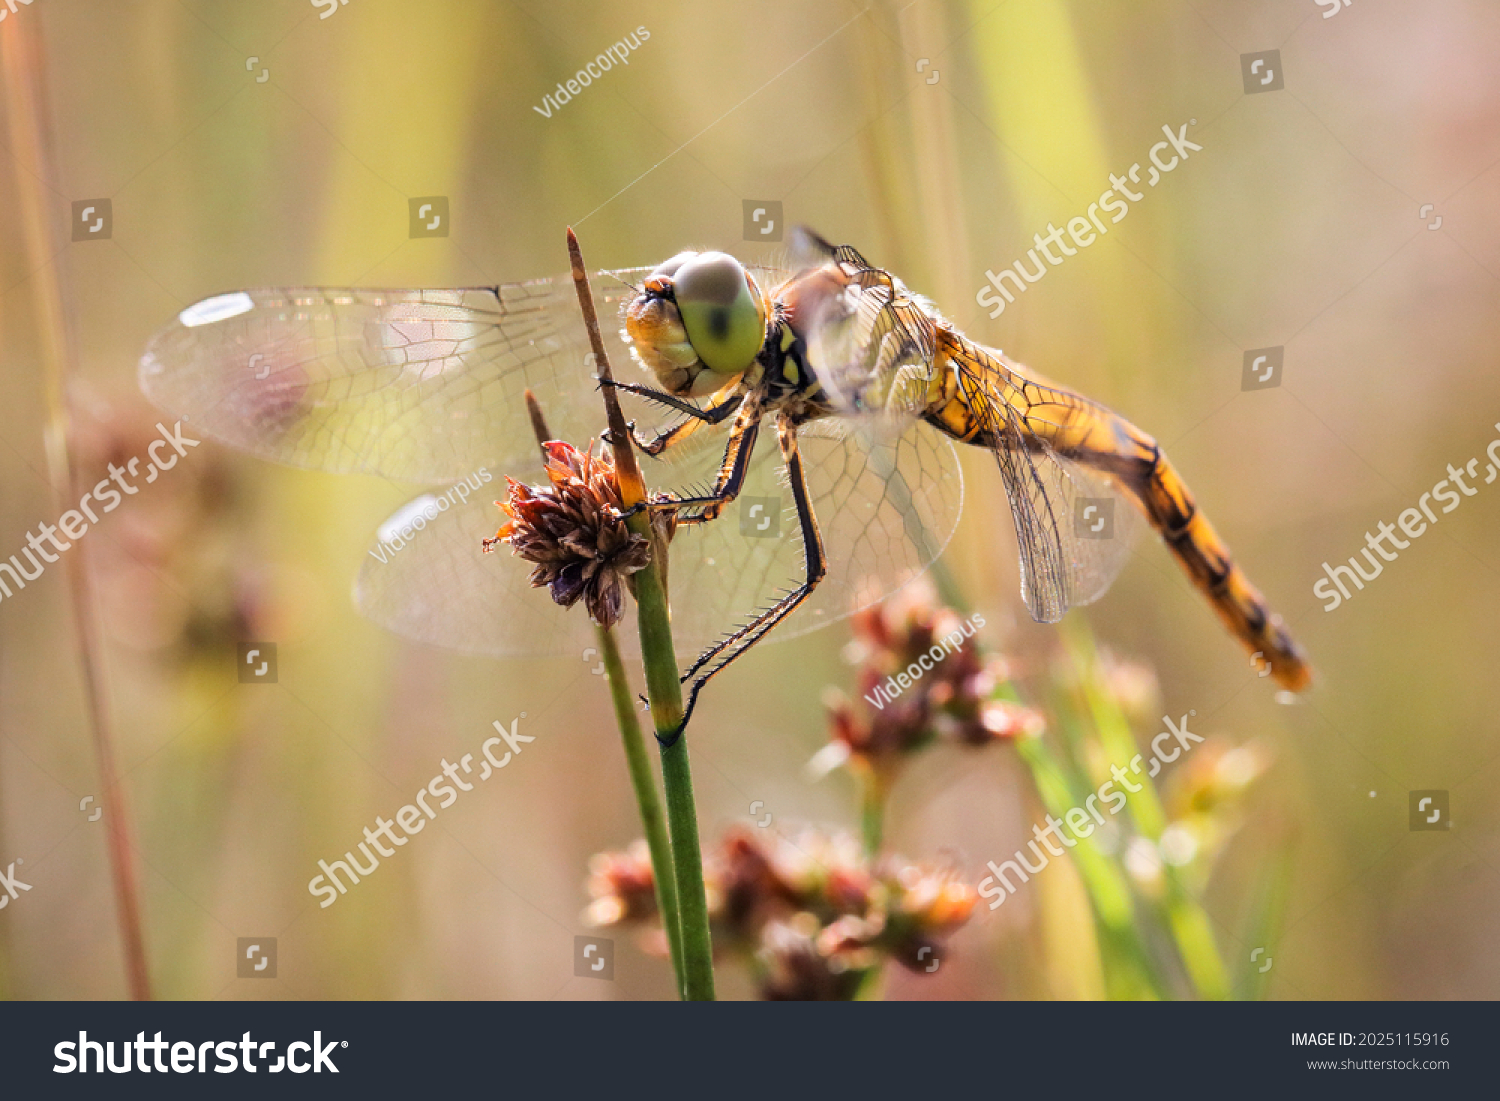 A yellow dragonfly is sitting on a twig in close-up. The dragonfly is hunting. Macro shots of a dragonfly. #2025115916